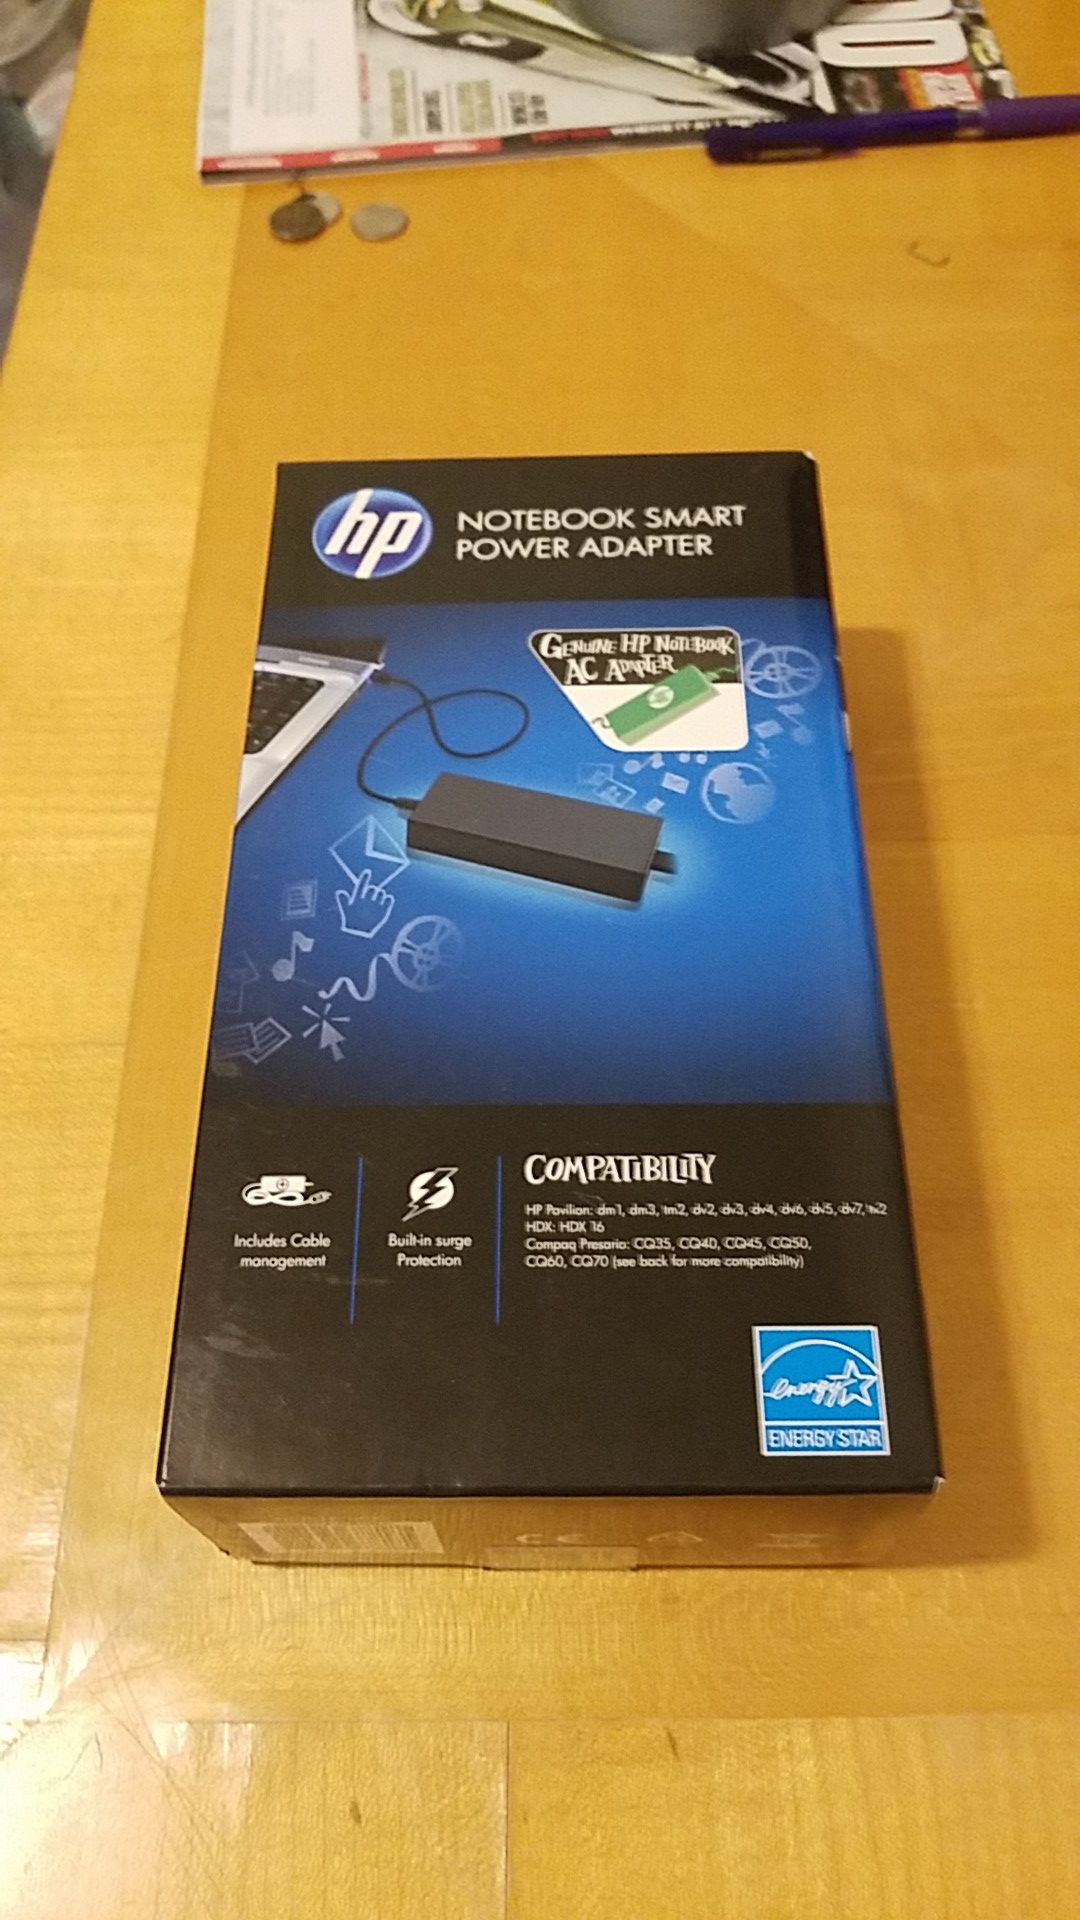 Genuine HP Notebook AC Adapter. New in box